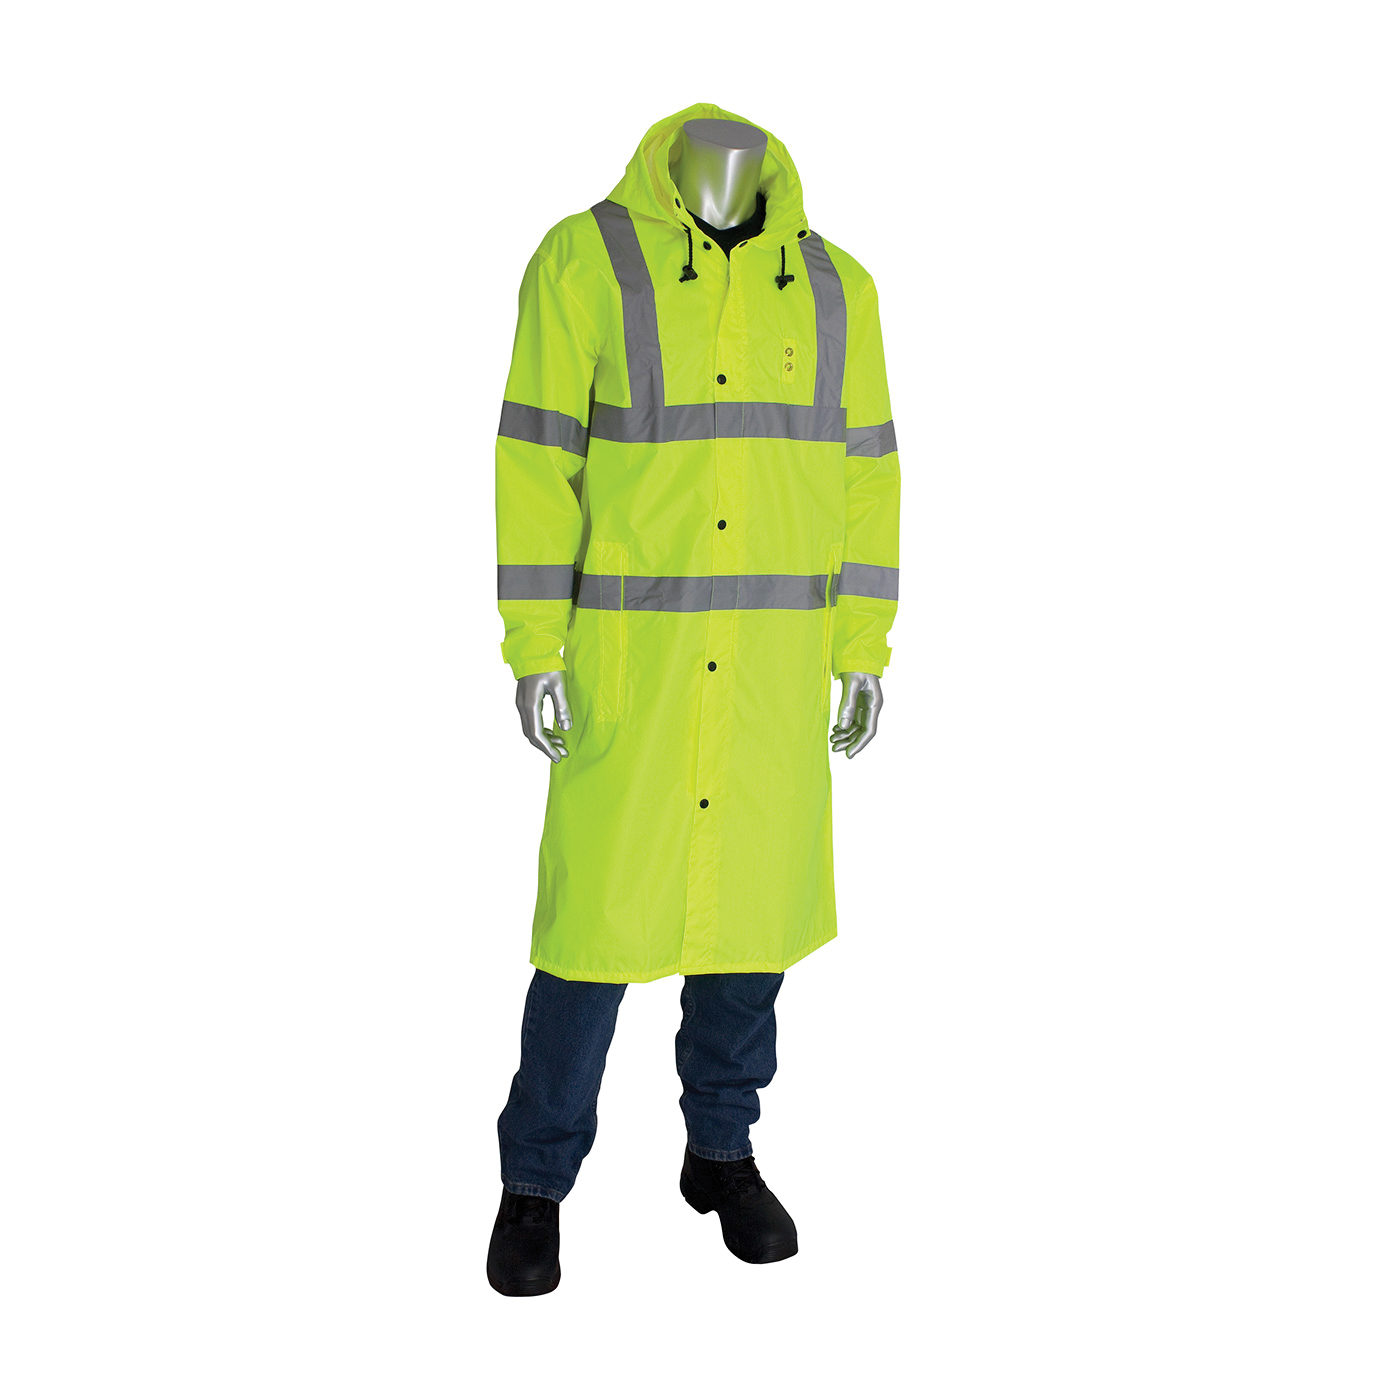 PIP® FALCON™ Viz™ 353-1048-LY/M All Purpose Waterproof Rain Coat, M, Hi-Viz Lime Yellow, 150D Polyester Coated with Polyurethane, Resists: Water, ANSI 107 Type R Class 3, Concealed Hood